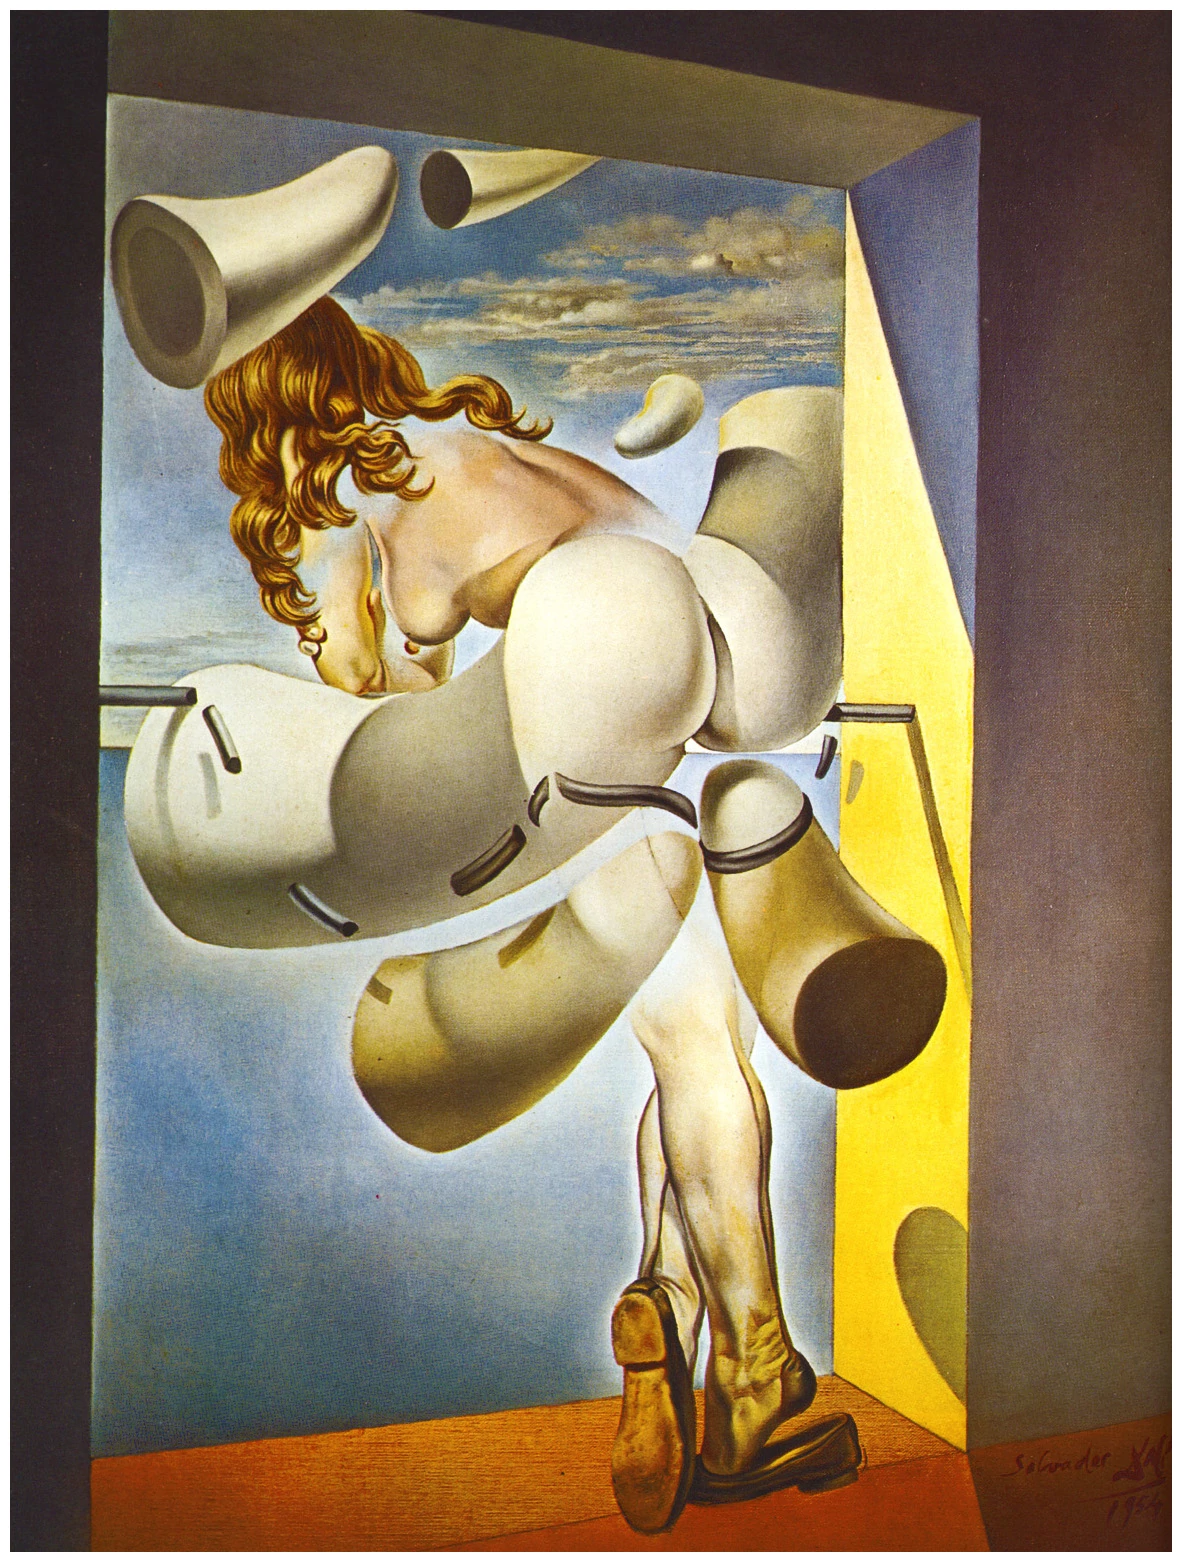 Young Virgin Auto-Sodomized by the Horns of Her Own Chastity, Salvador Dalí